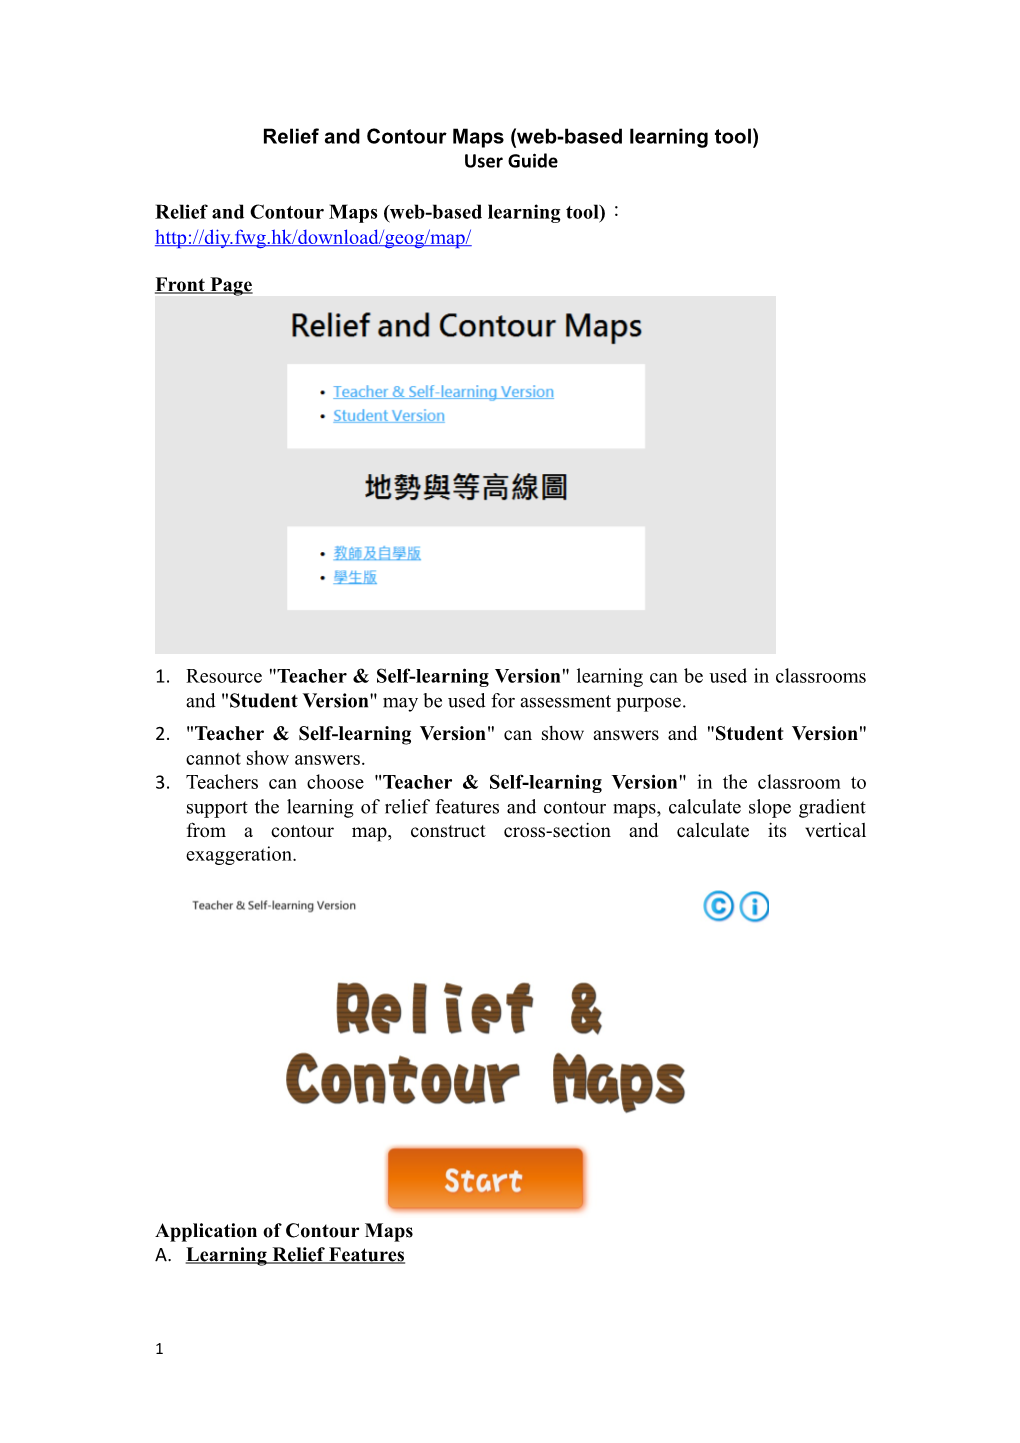 Relief and Contour Maps (Web-Based Learning Tool)